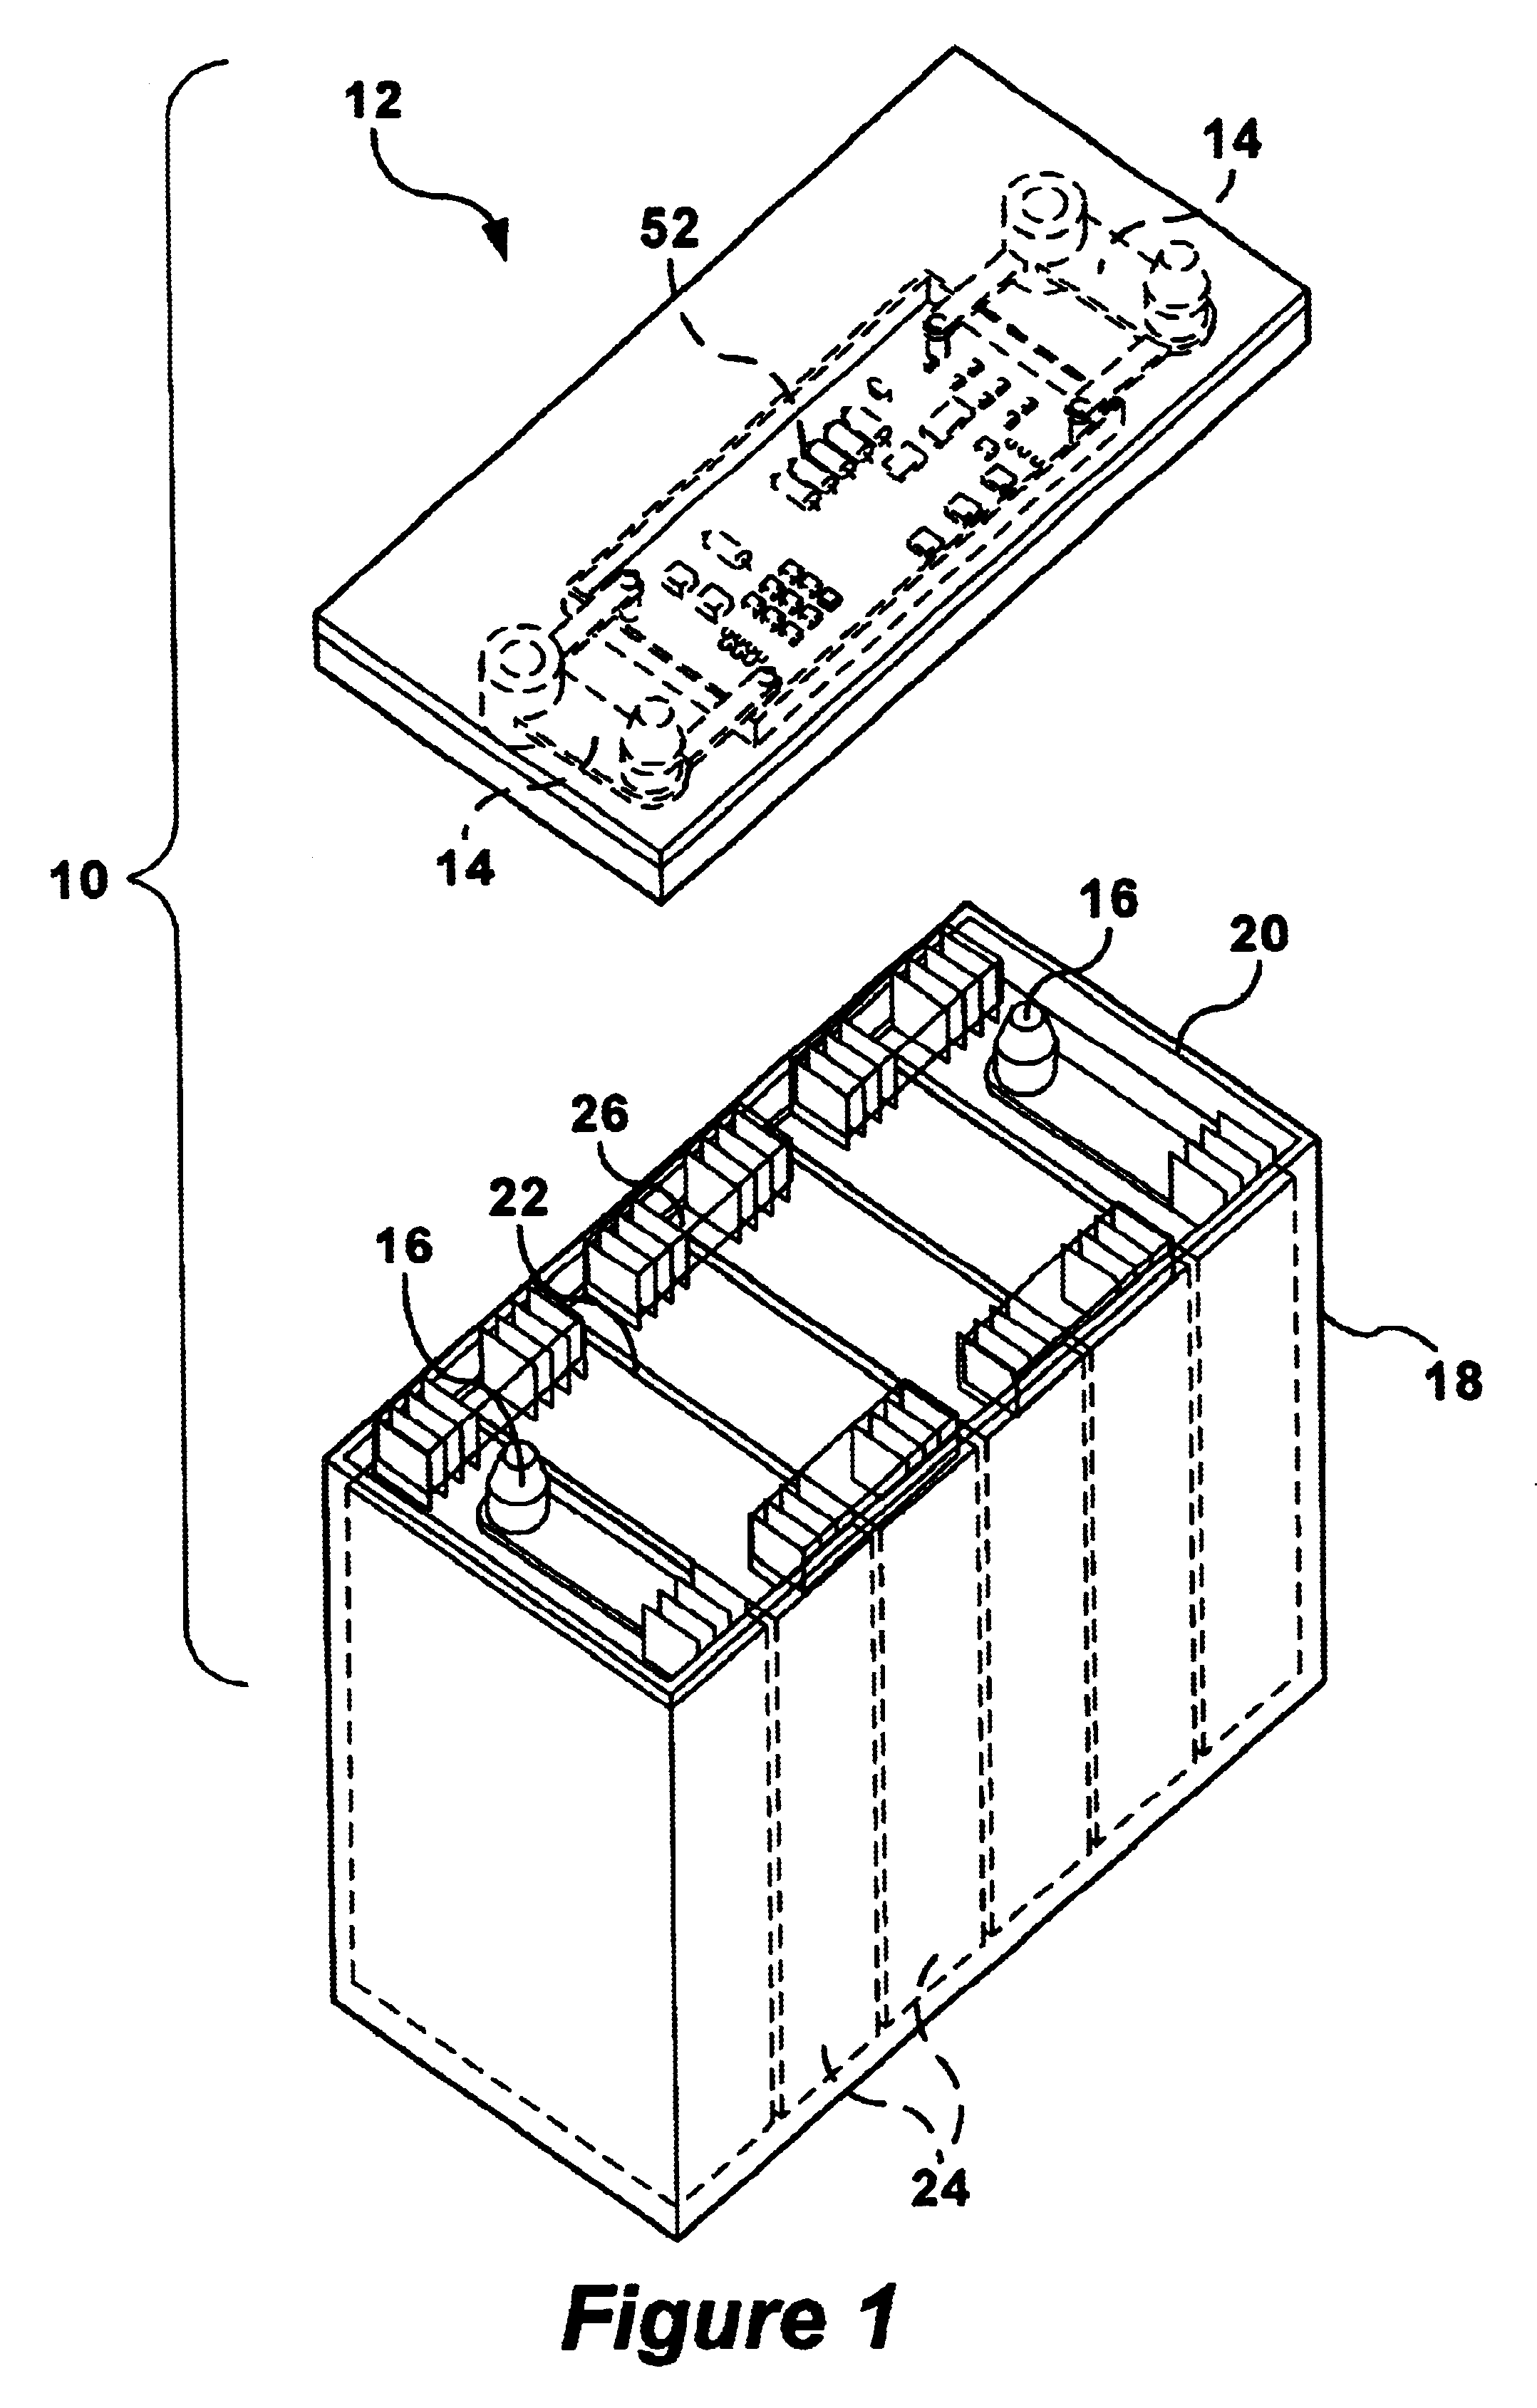 Current measuring terminal assembly for a battery